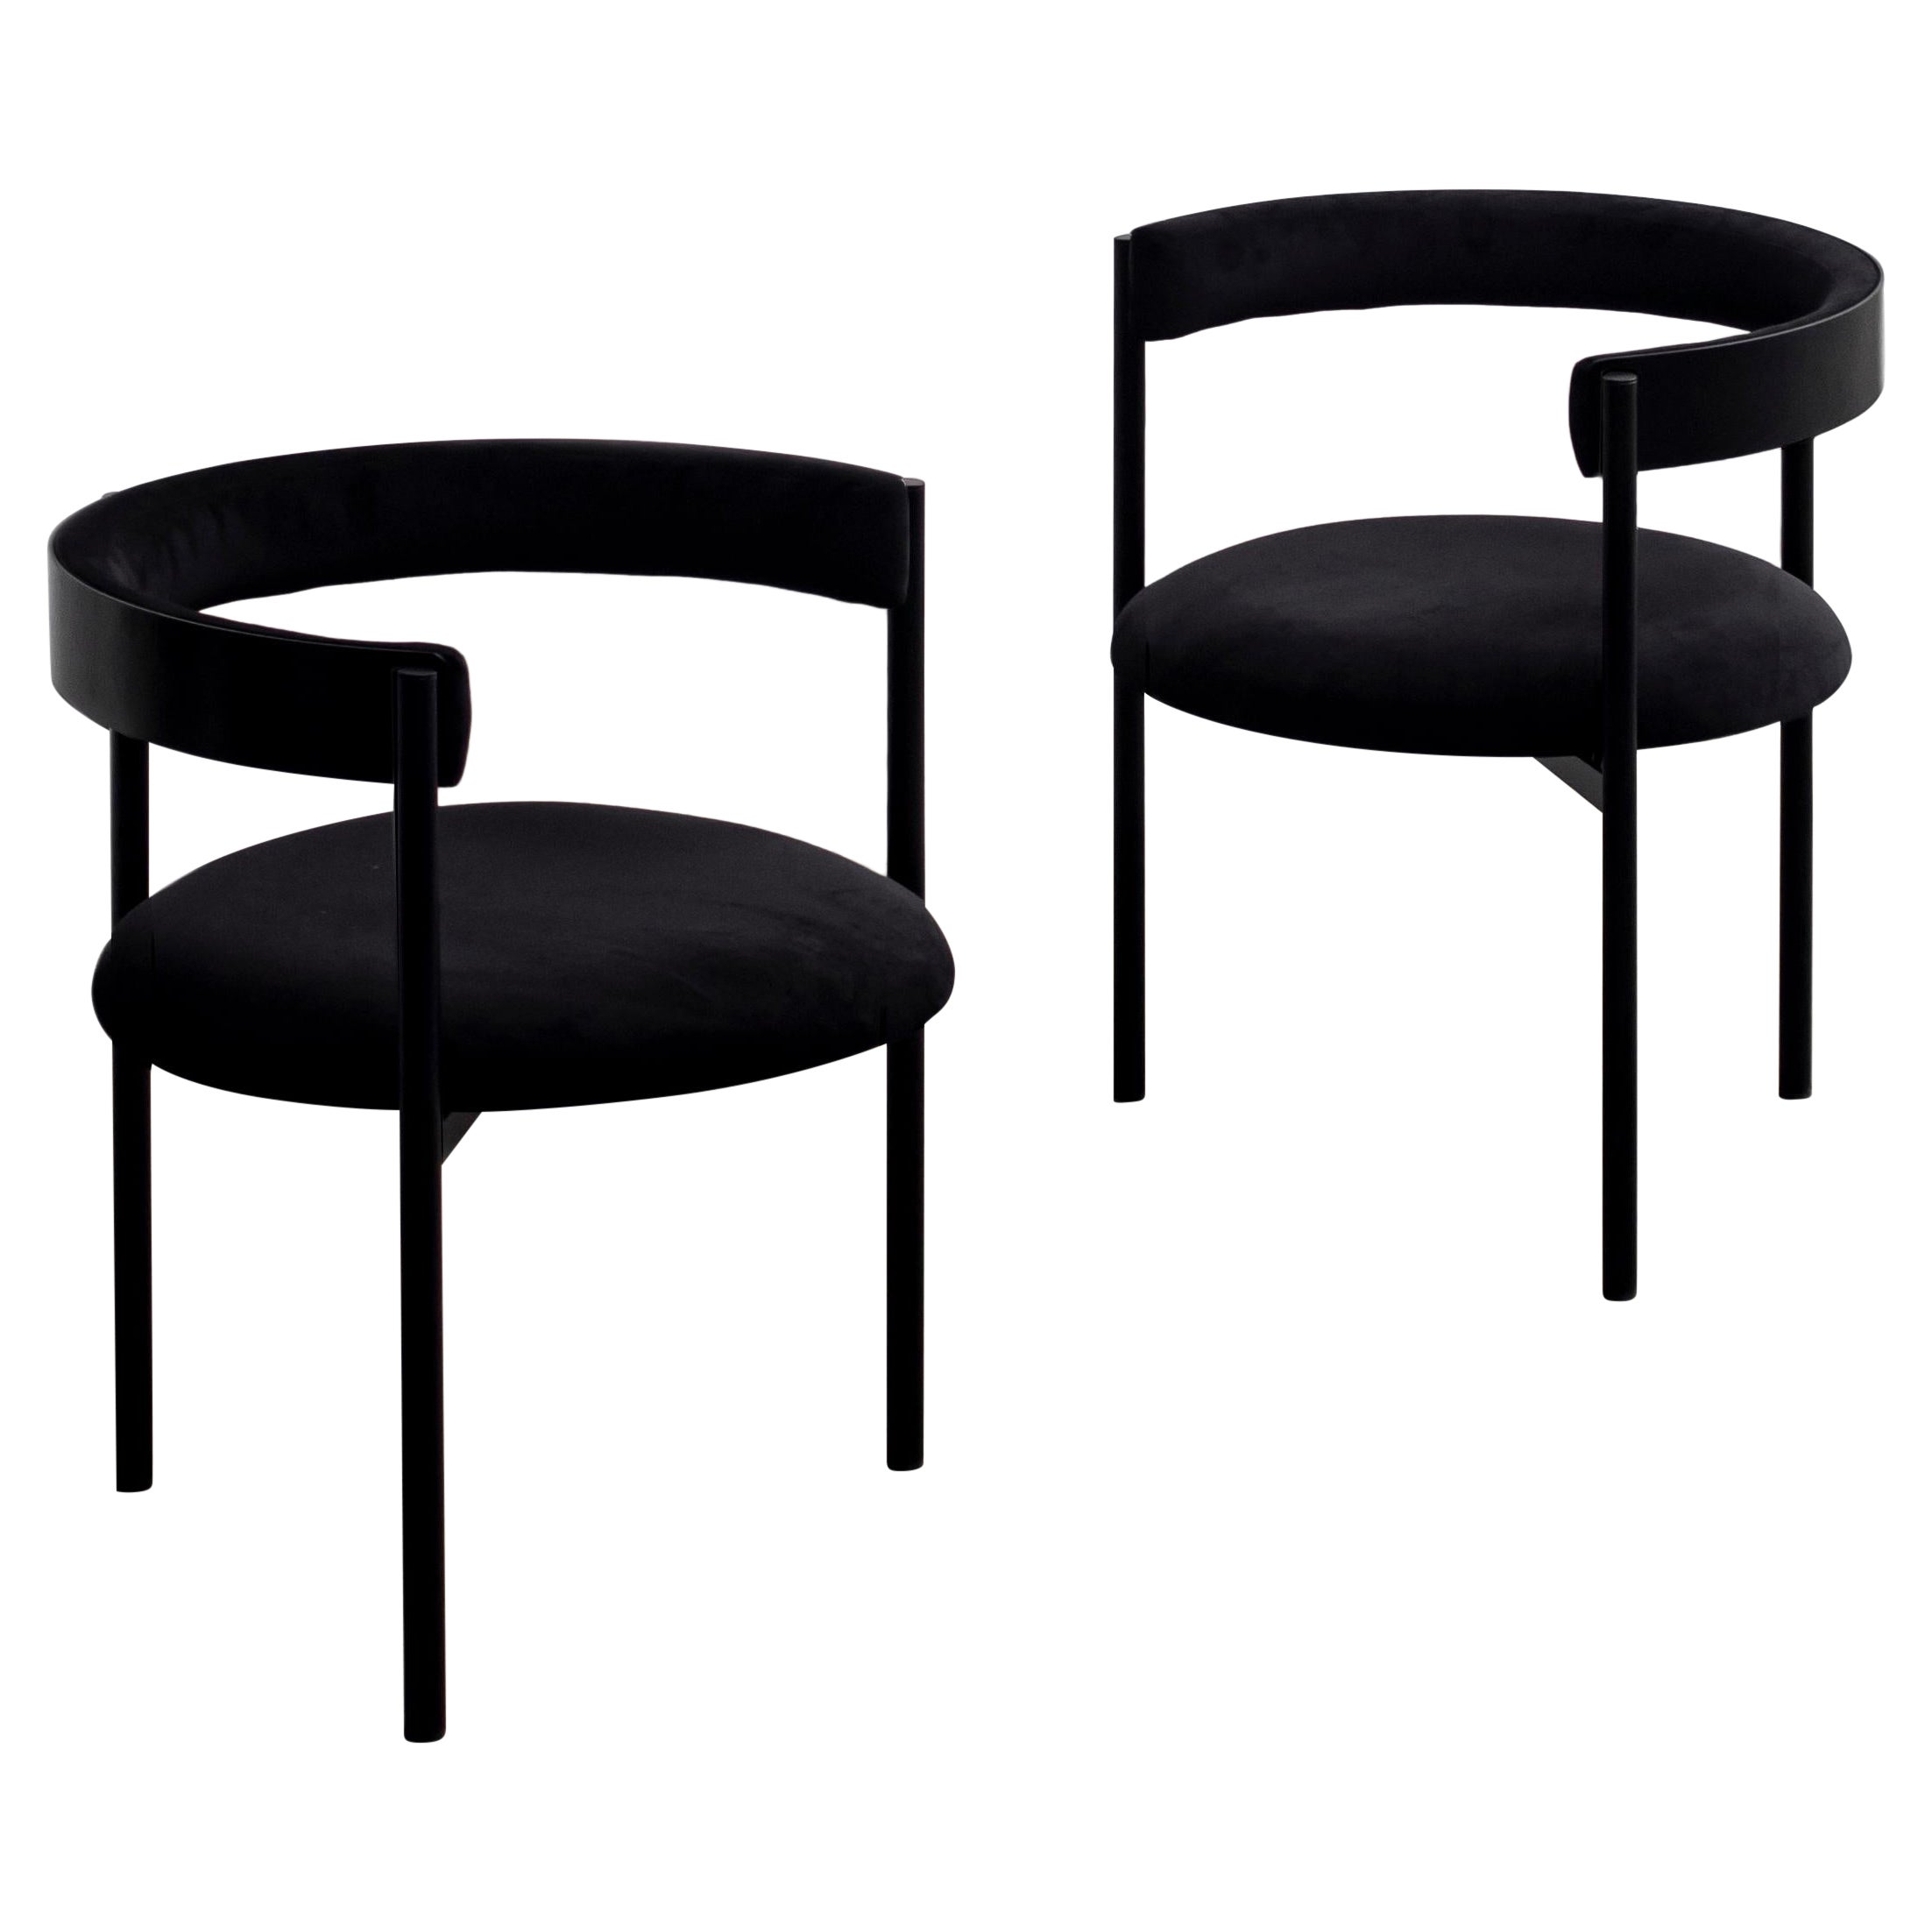 Set of 2 Aro Chairs, Black by Ries For Sale